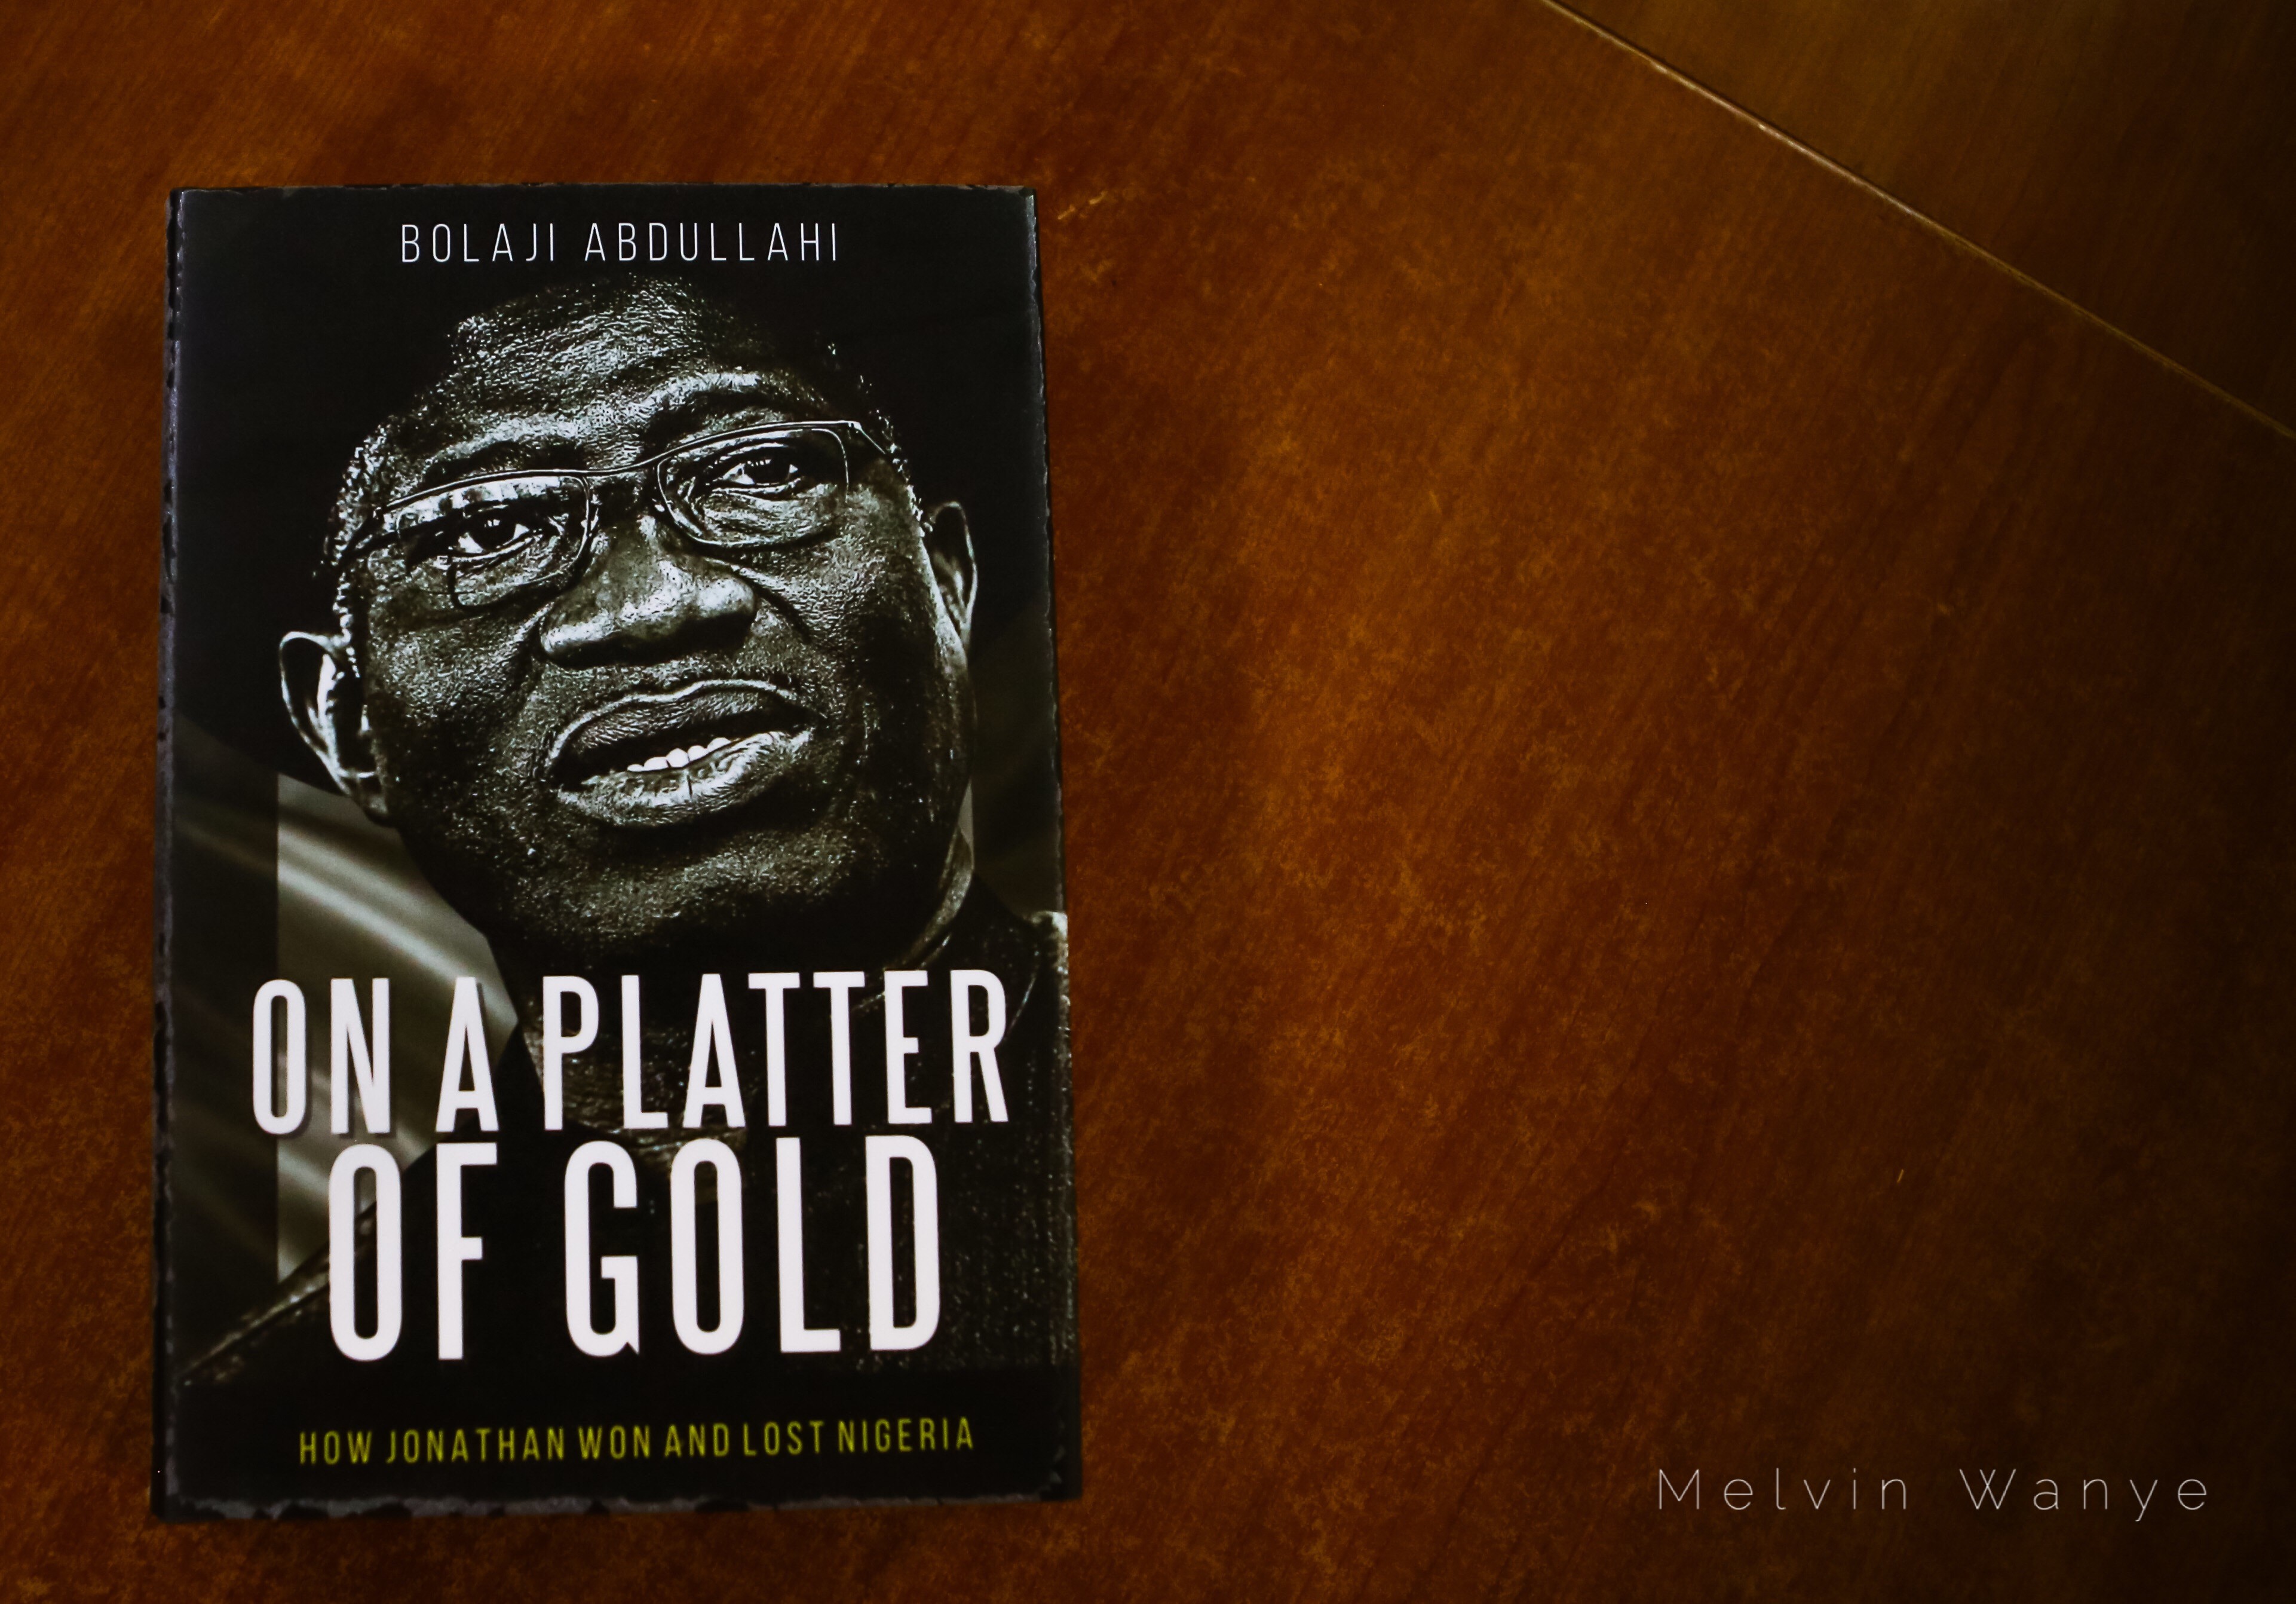 Book Review: “On A Platter of Gold: How Jonathan Won And Lost Nigeria By Bolaji Abdullahi”